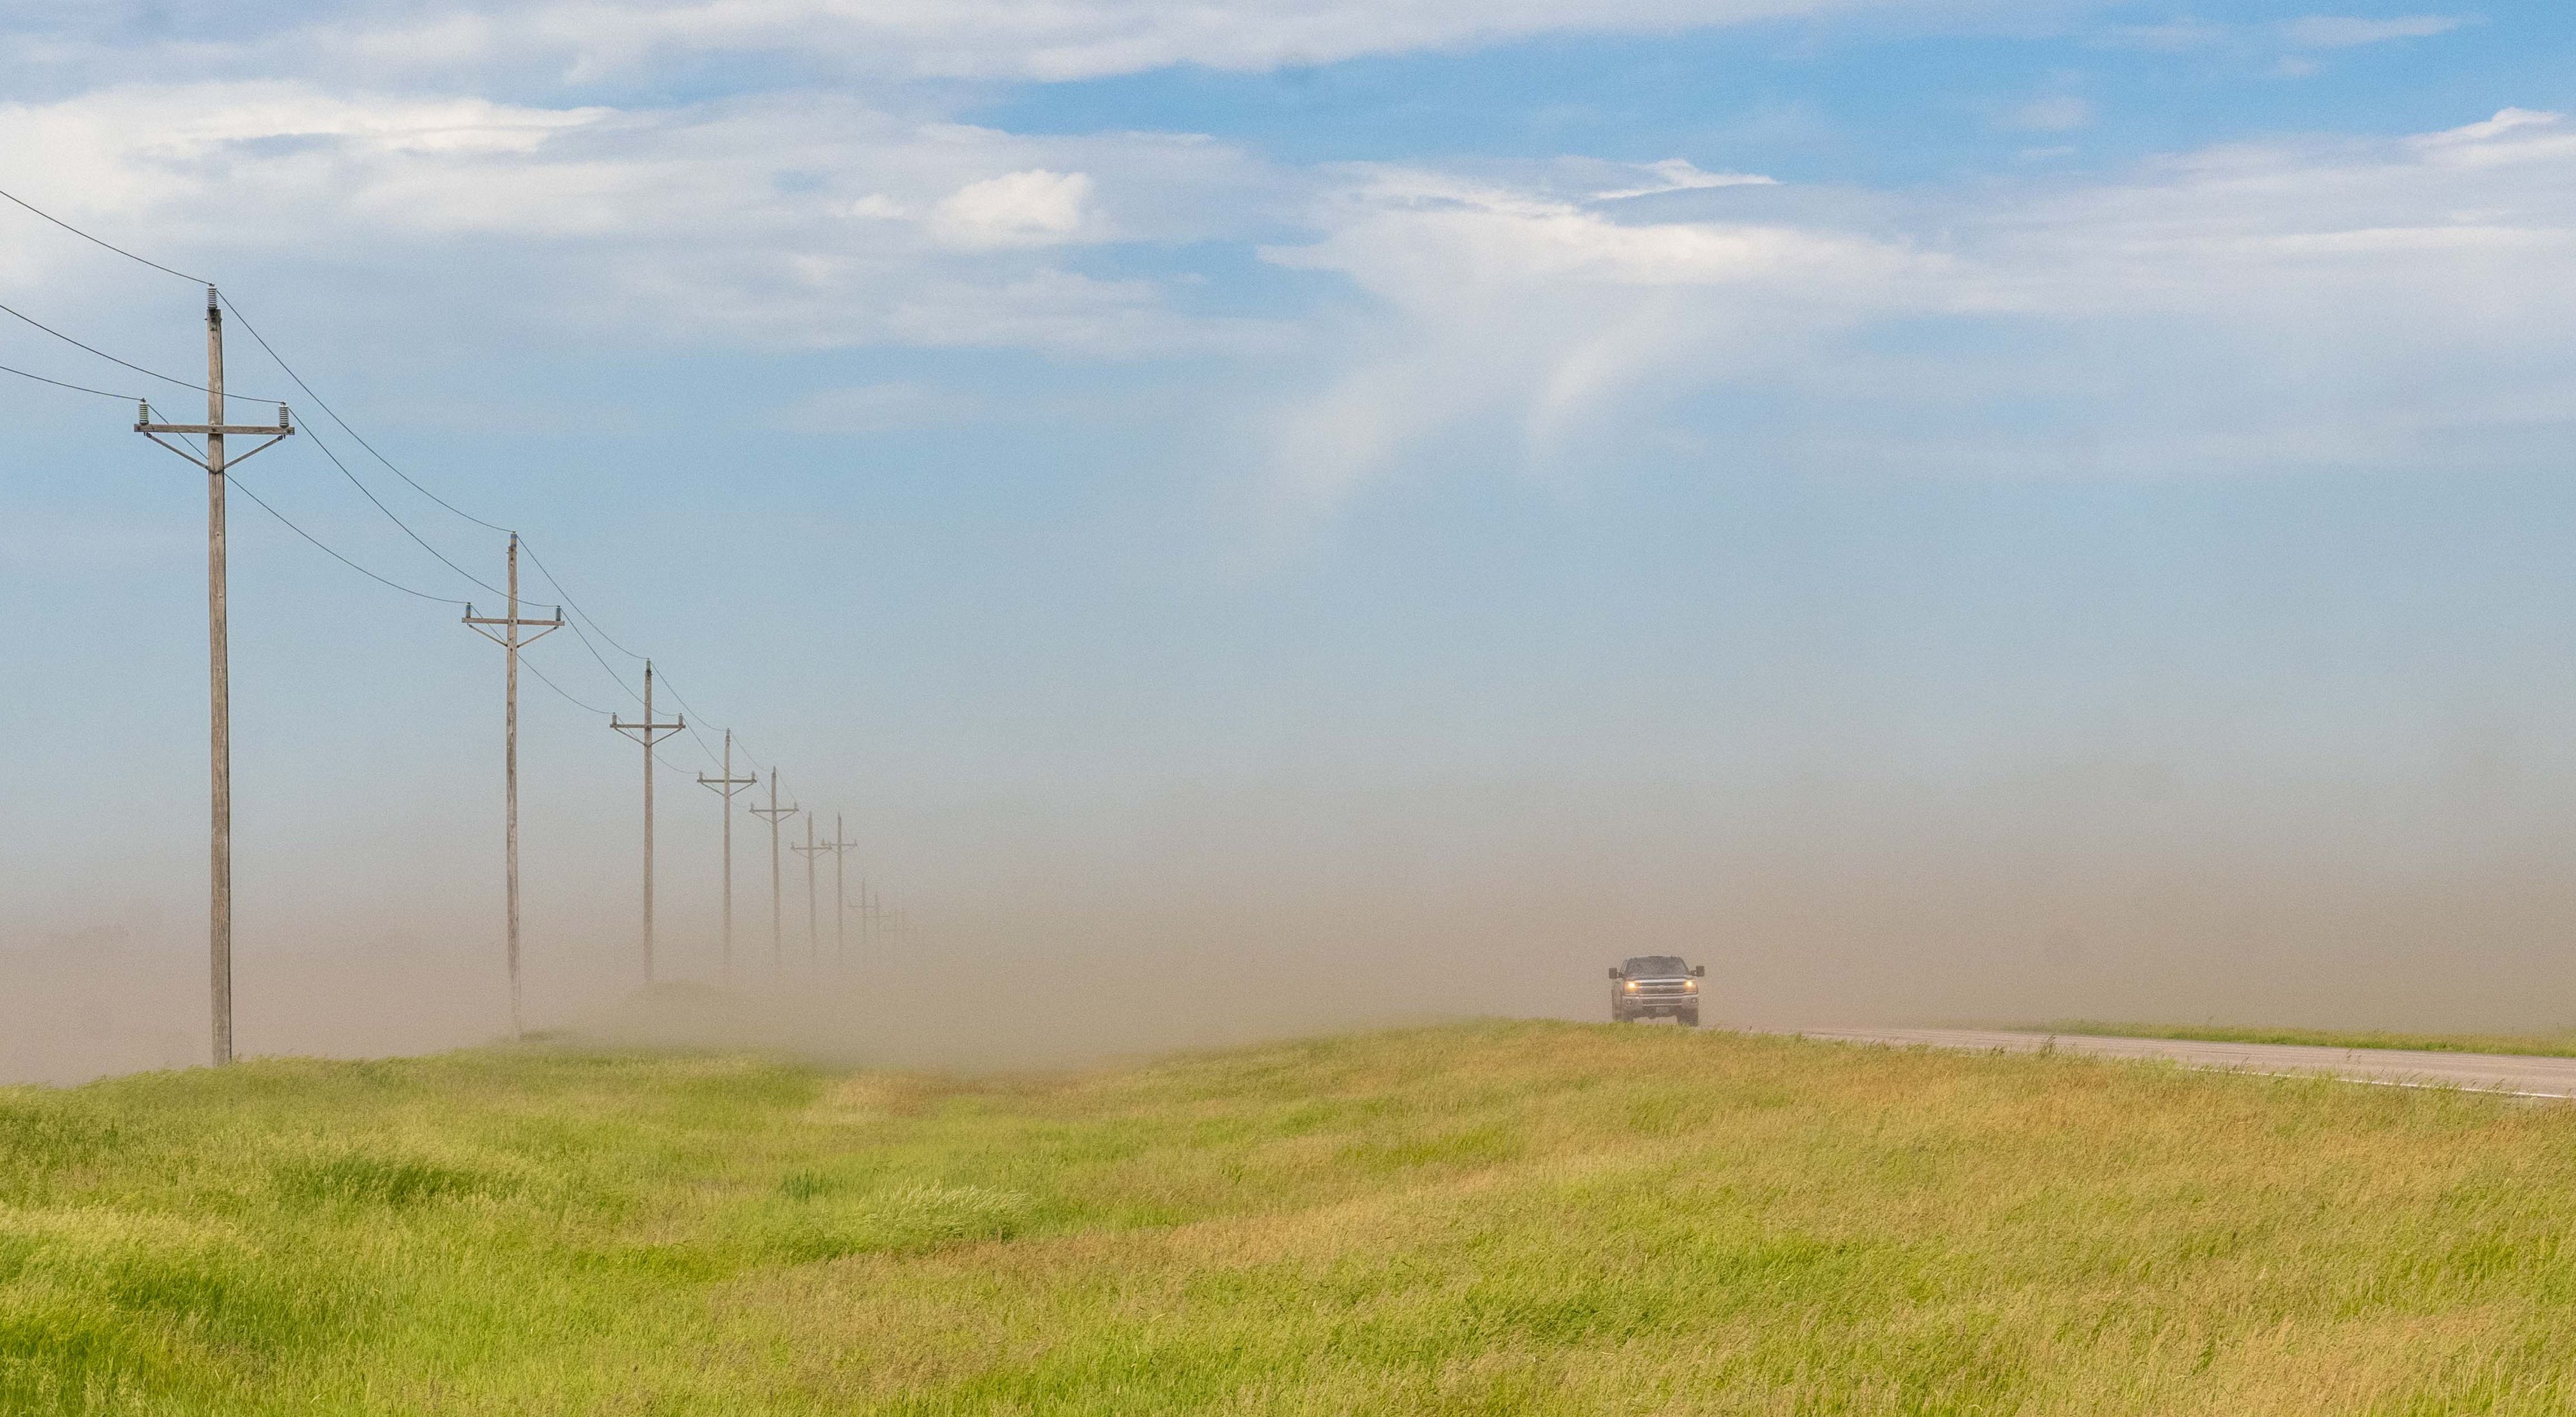 soil blowing across a field with a road and vehicle on the right.